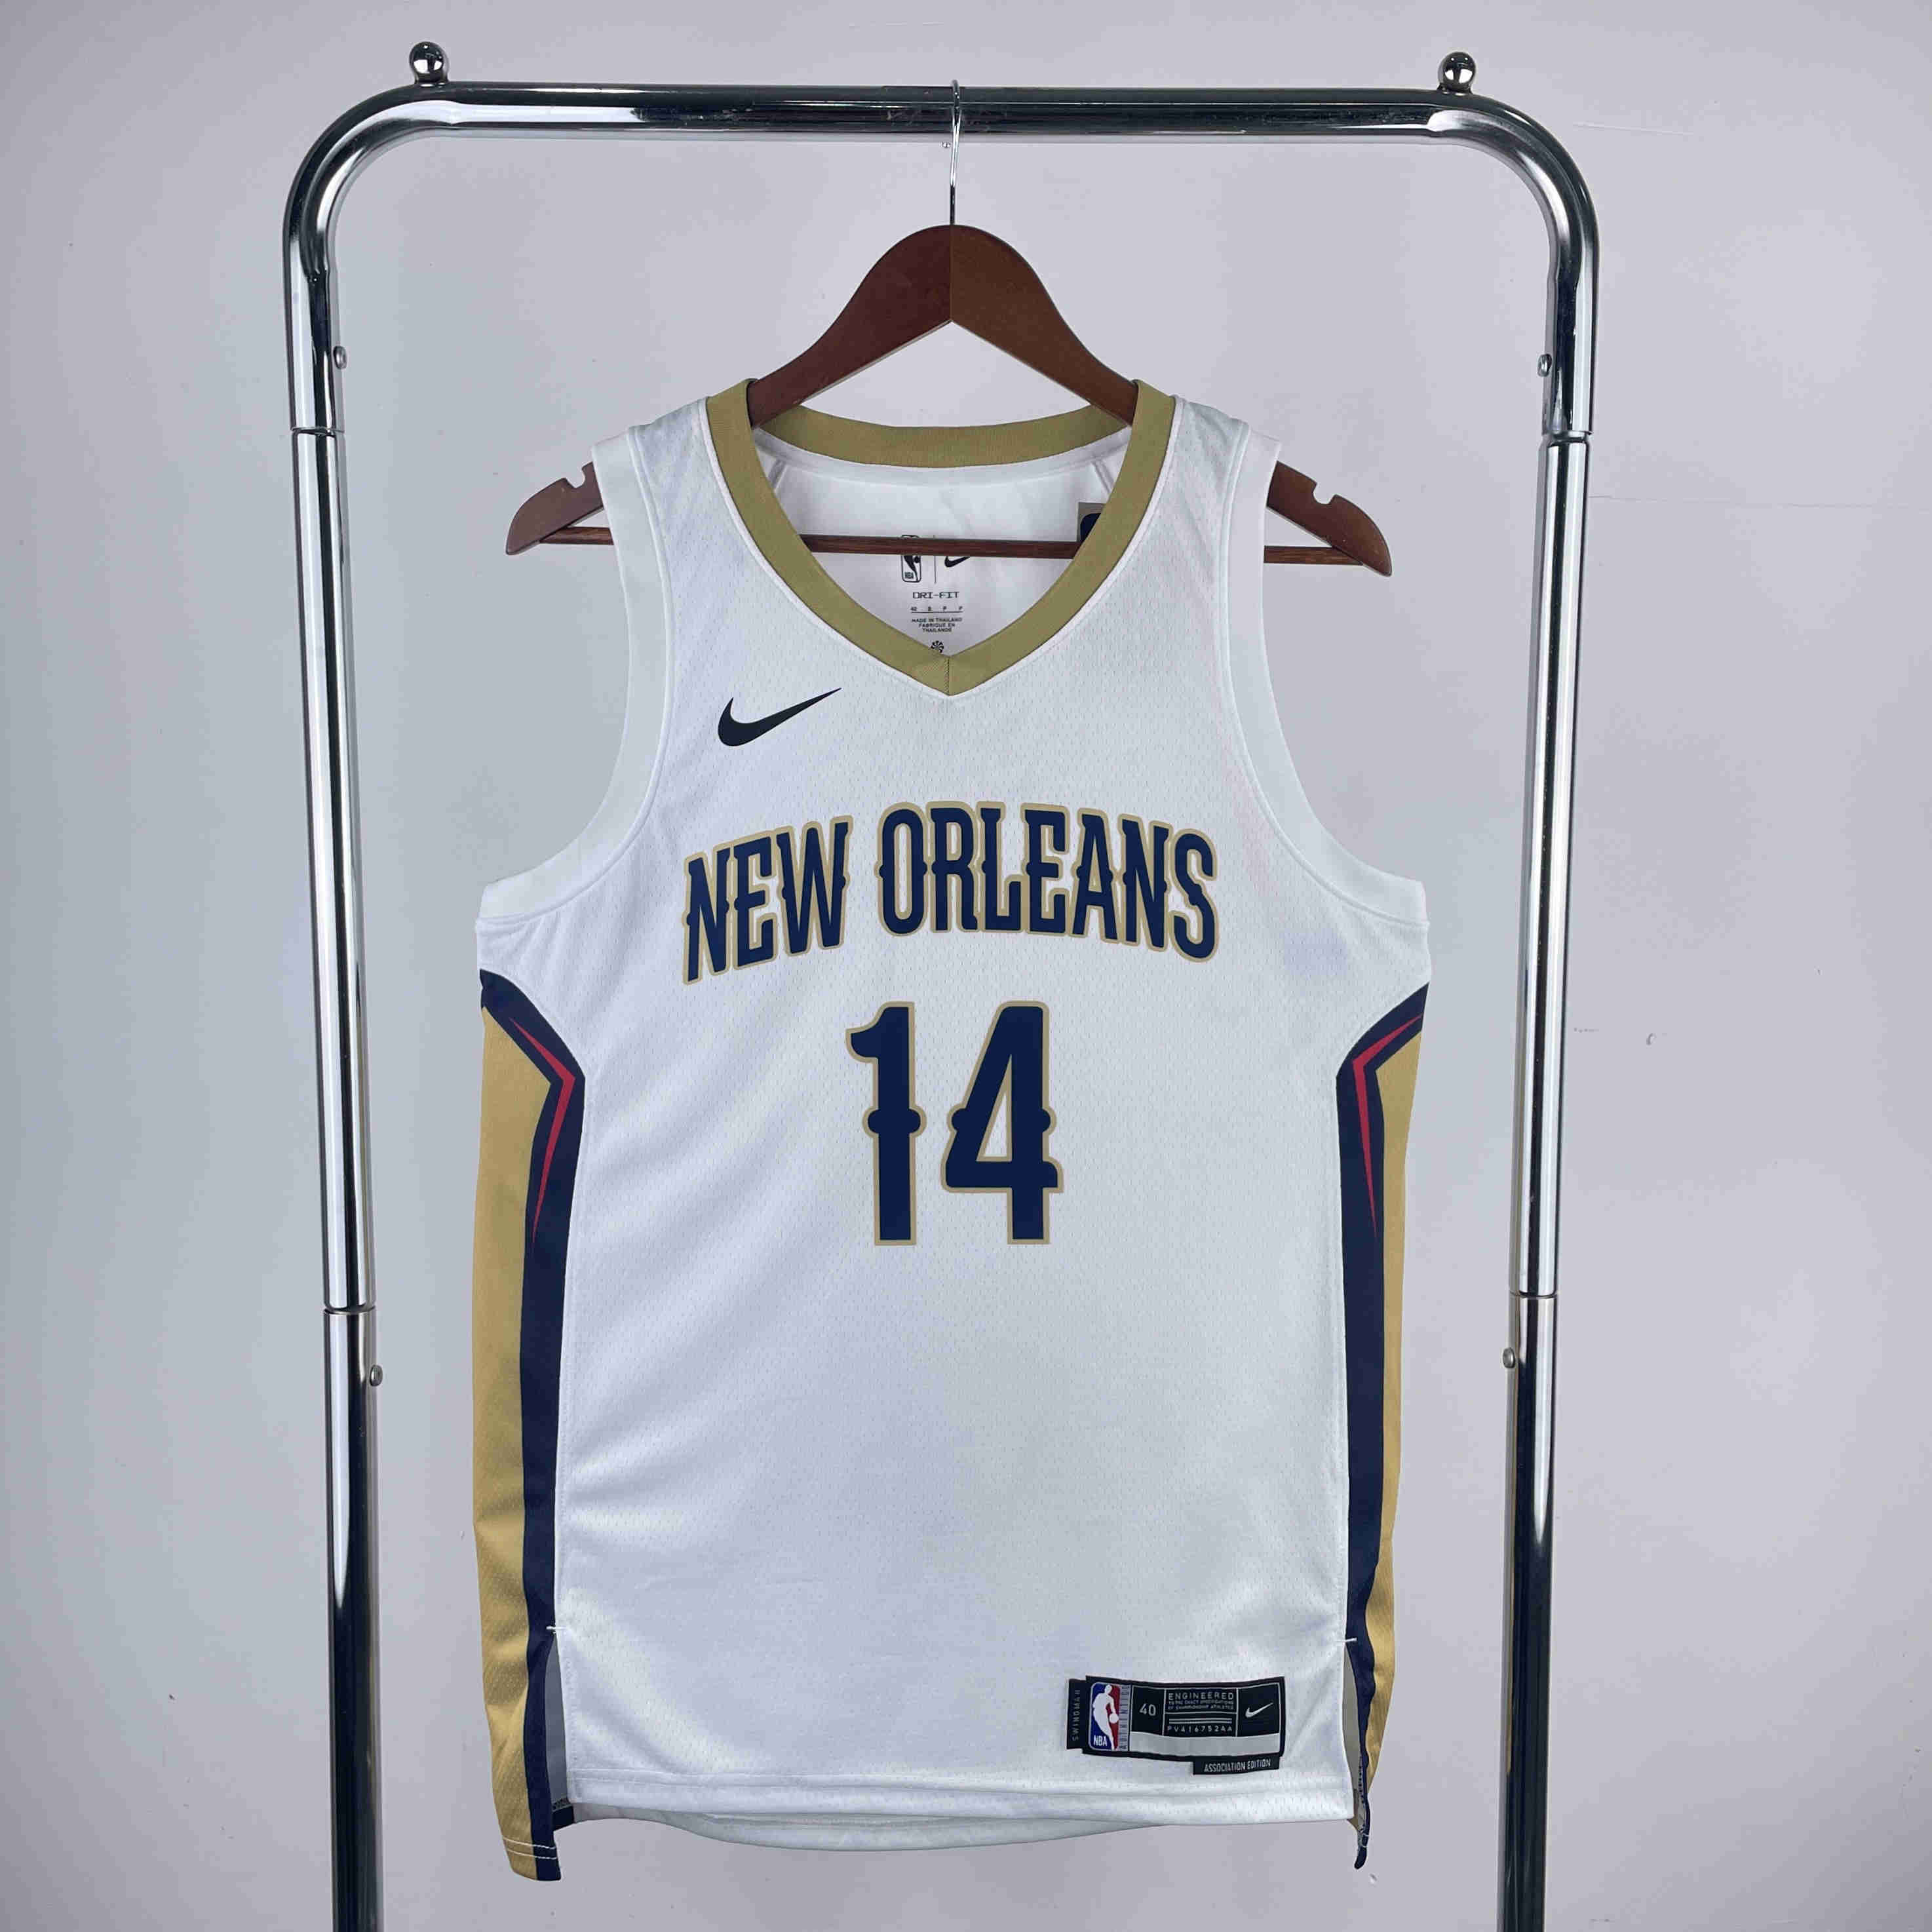  New Orleans Pelicans  NBA Jersey home white  Ingram 14